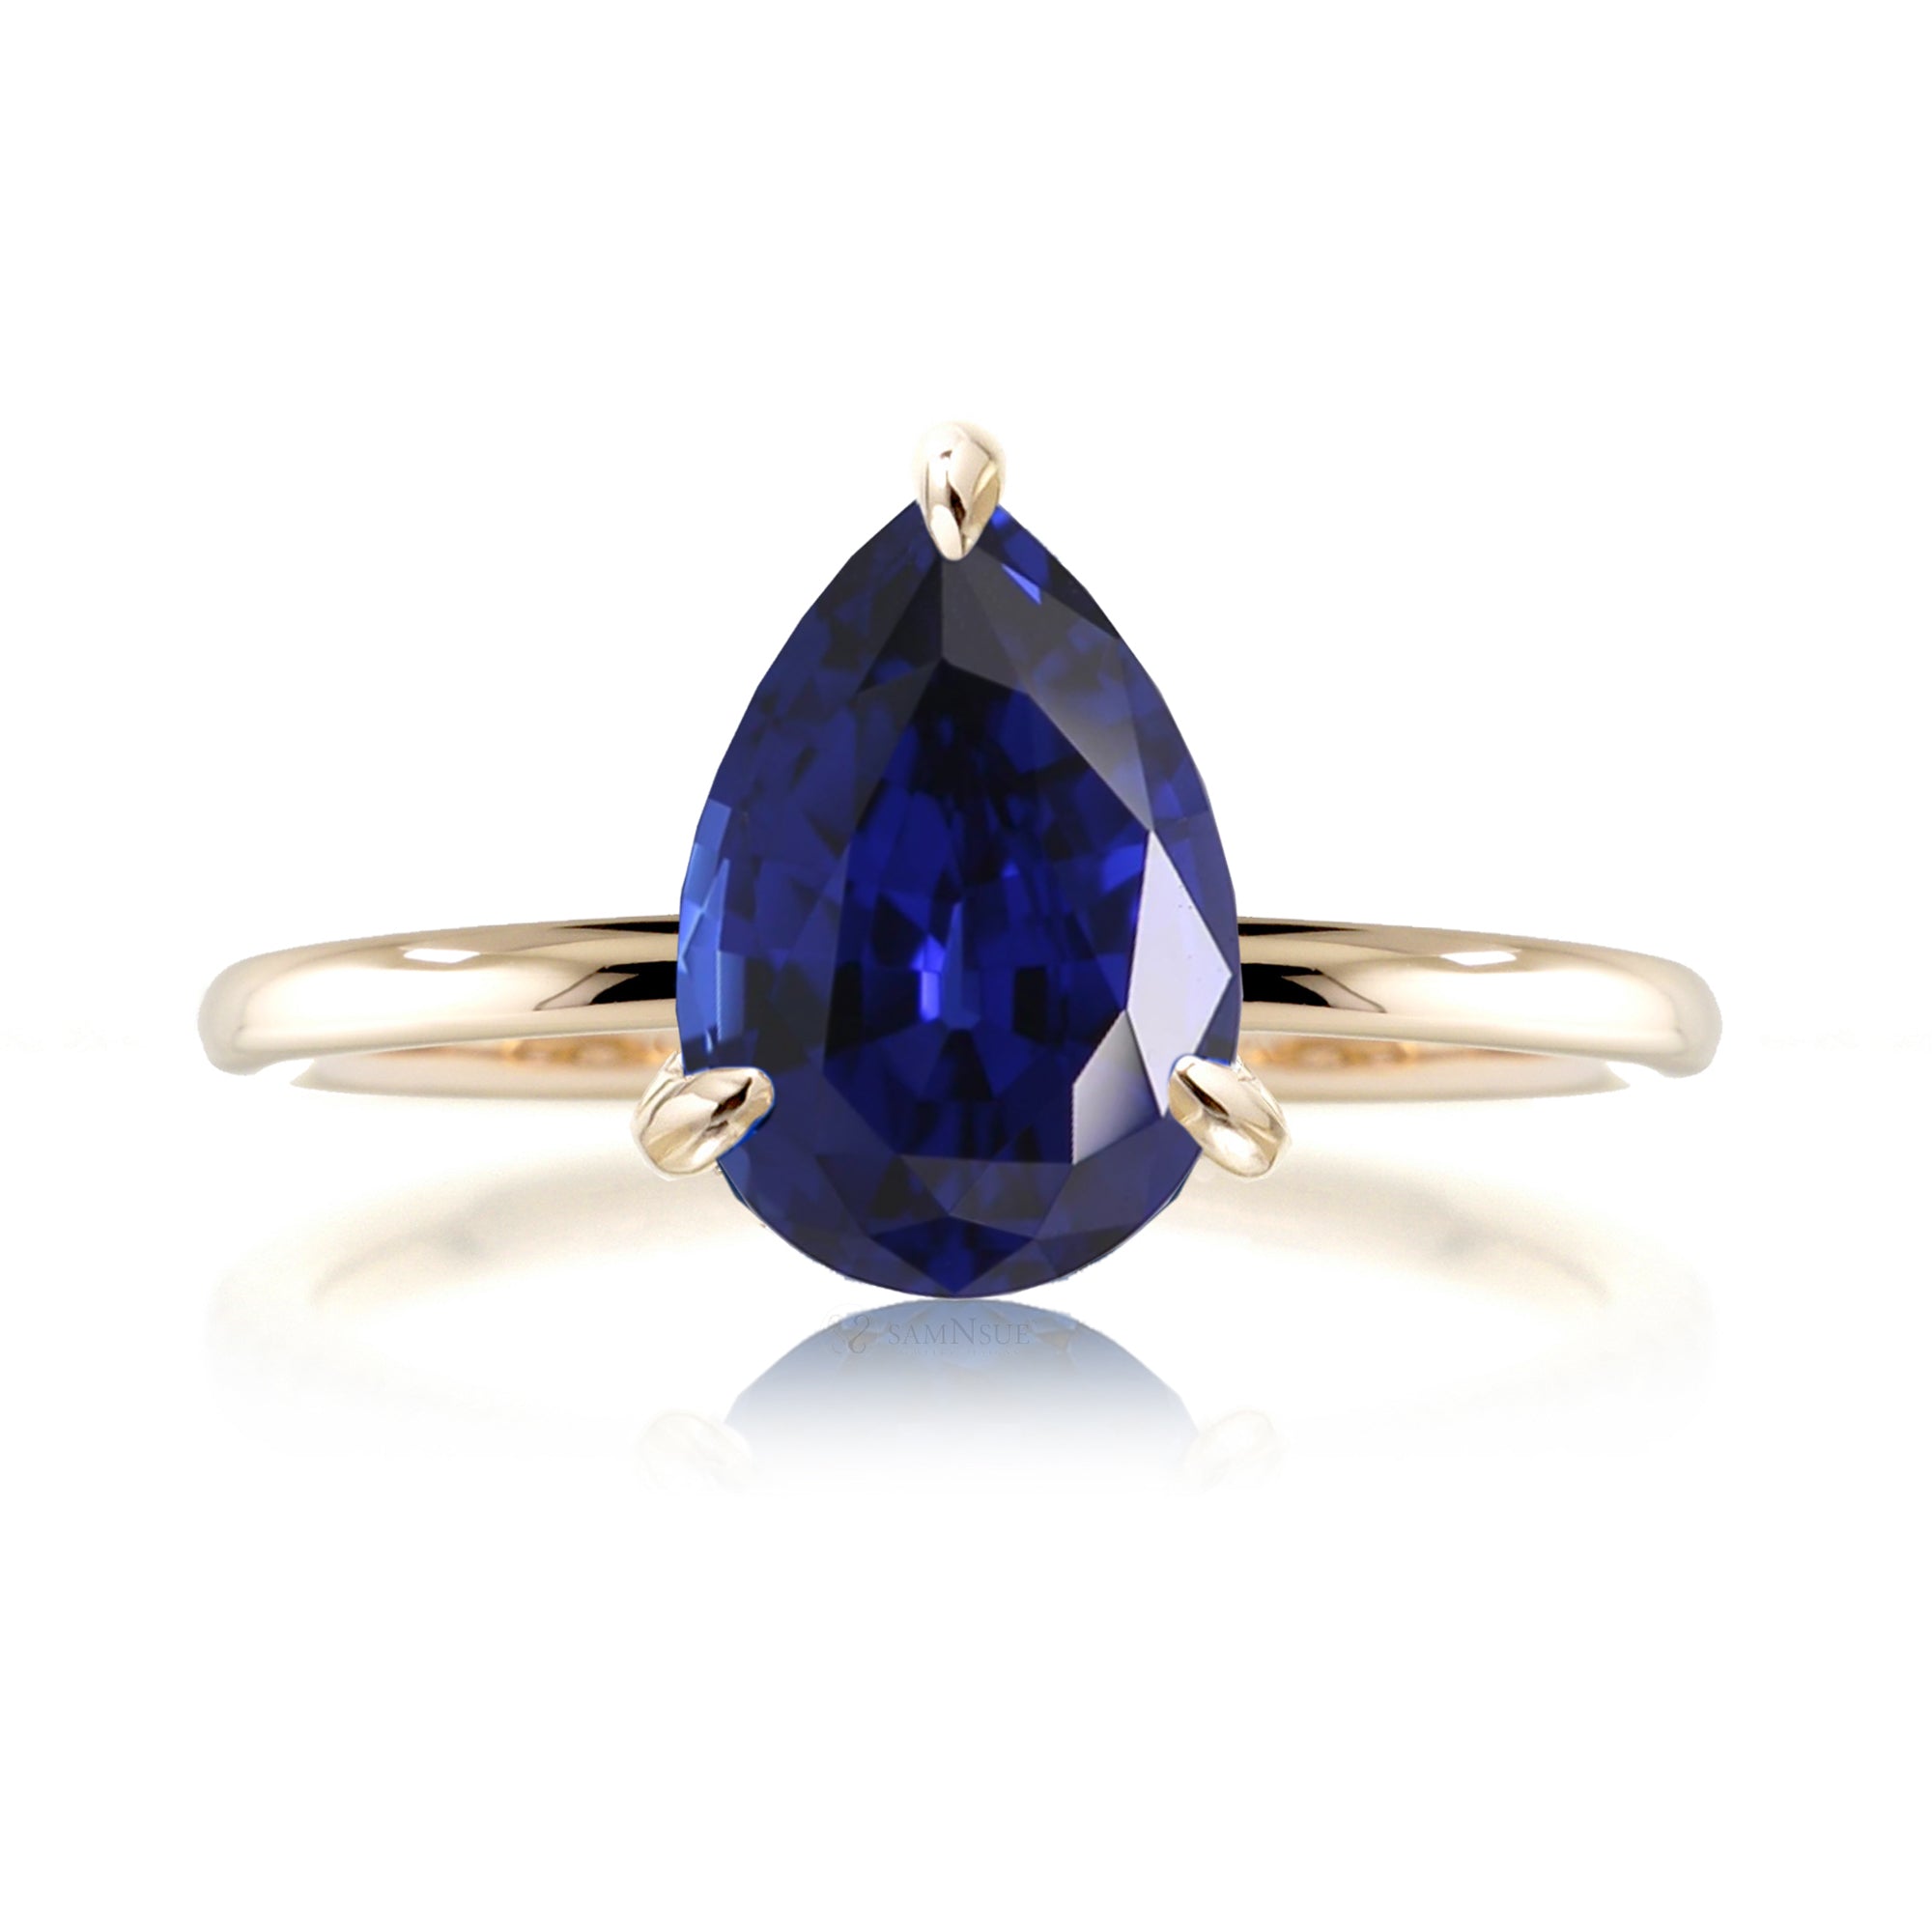 Pear cut blue sapphire solid band engagement ring yellow gold - the Ava